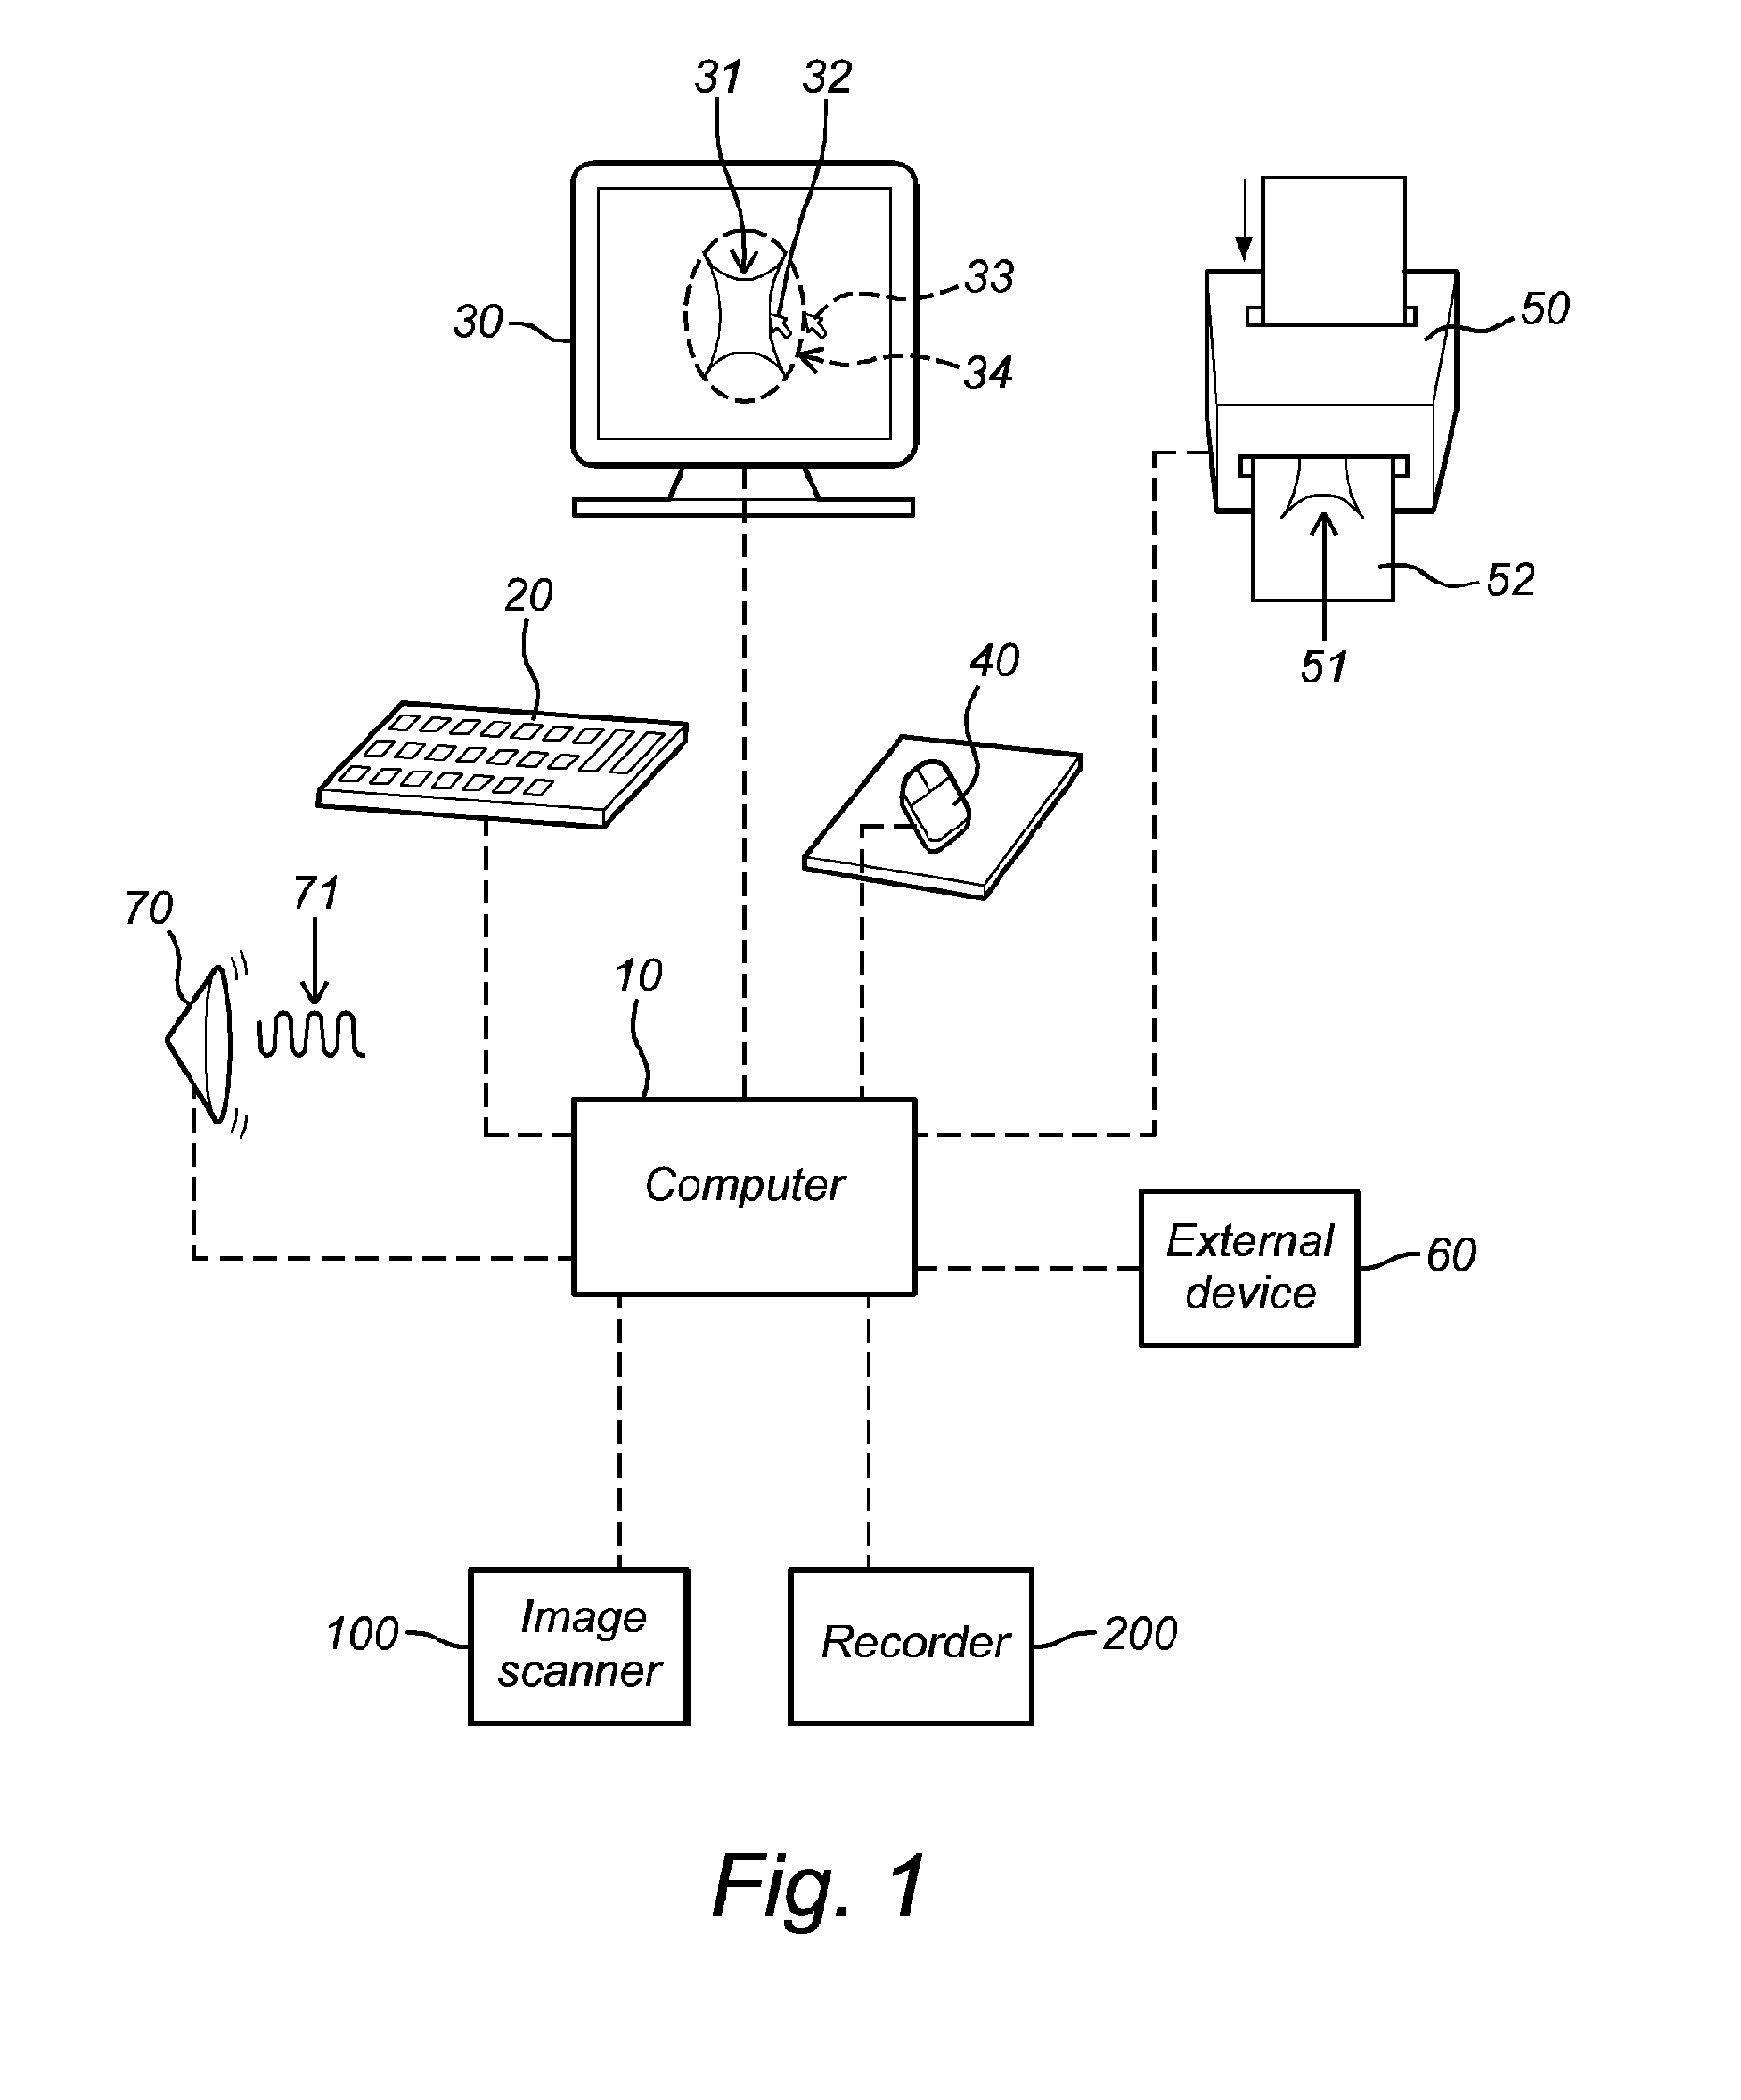 Lens Antenna, Method for Manufacturing and Using such an Antenna, and Antenna System